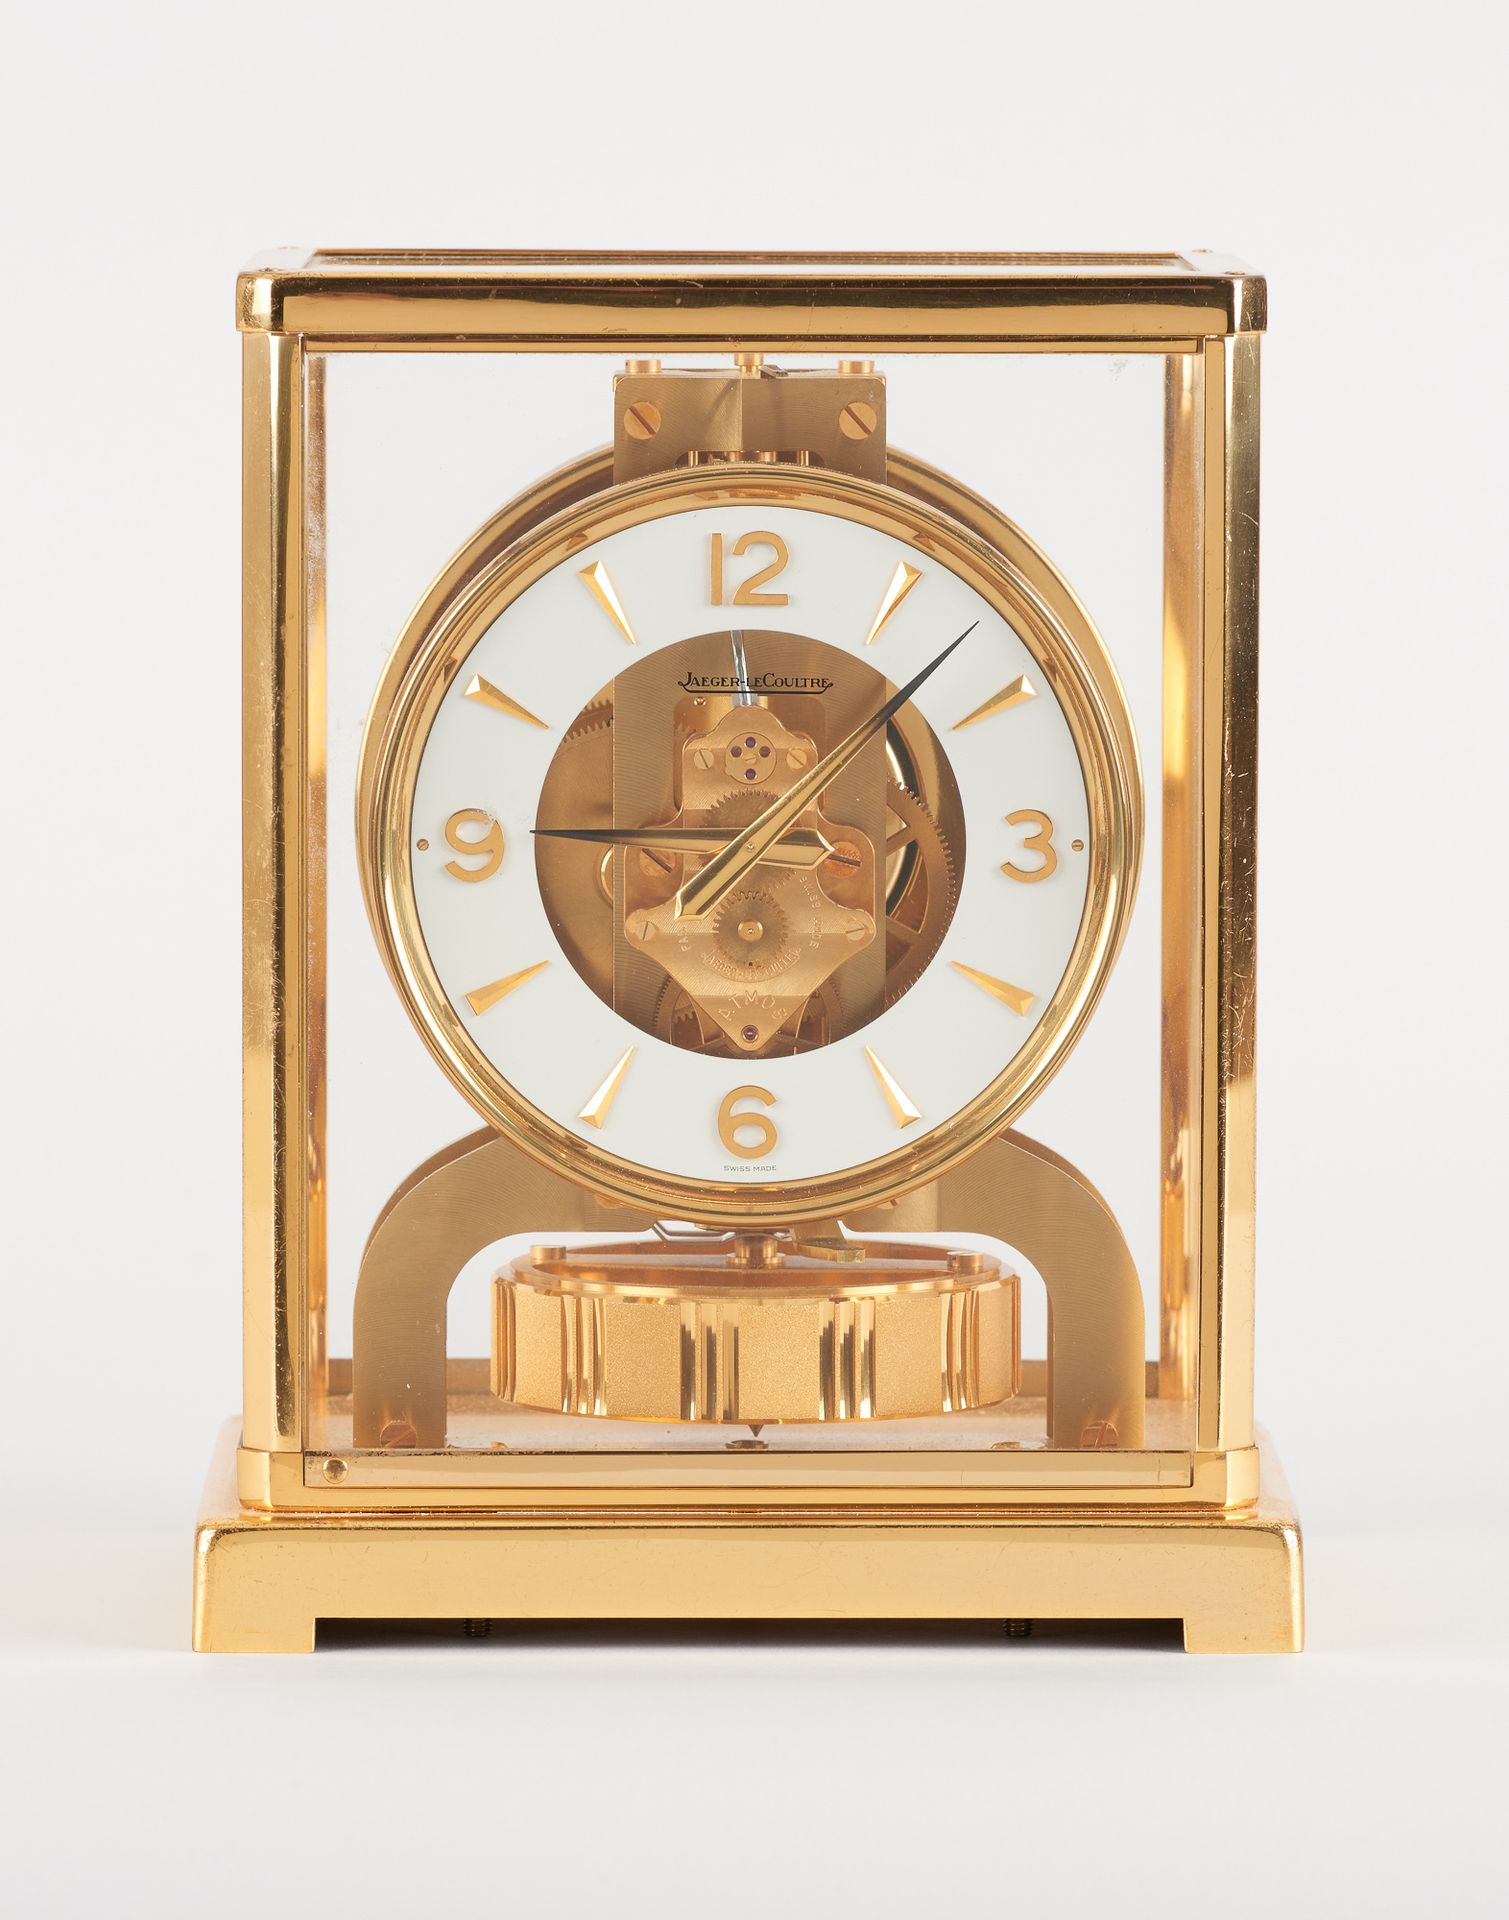 JAEGER LECOULTRE. Watches: Brass and glass table clock.

Jaeger LeCoultre, model&hellip;